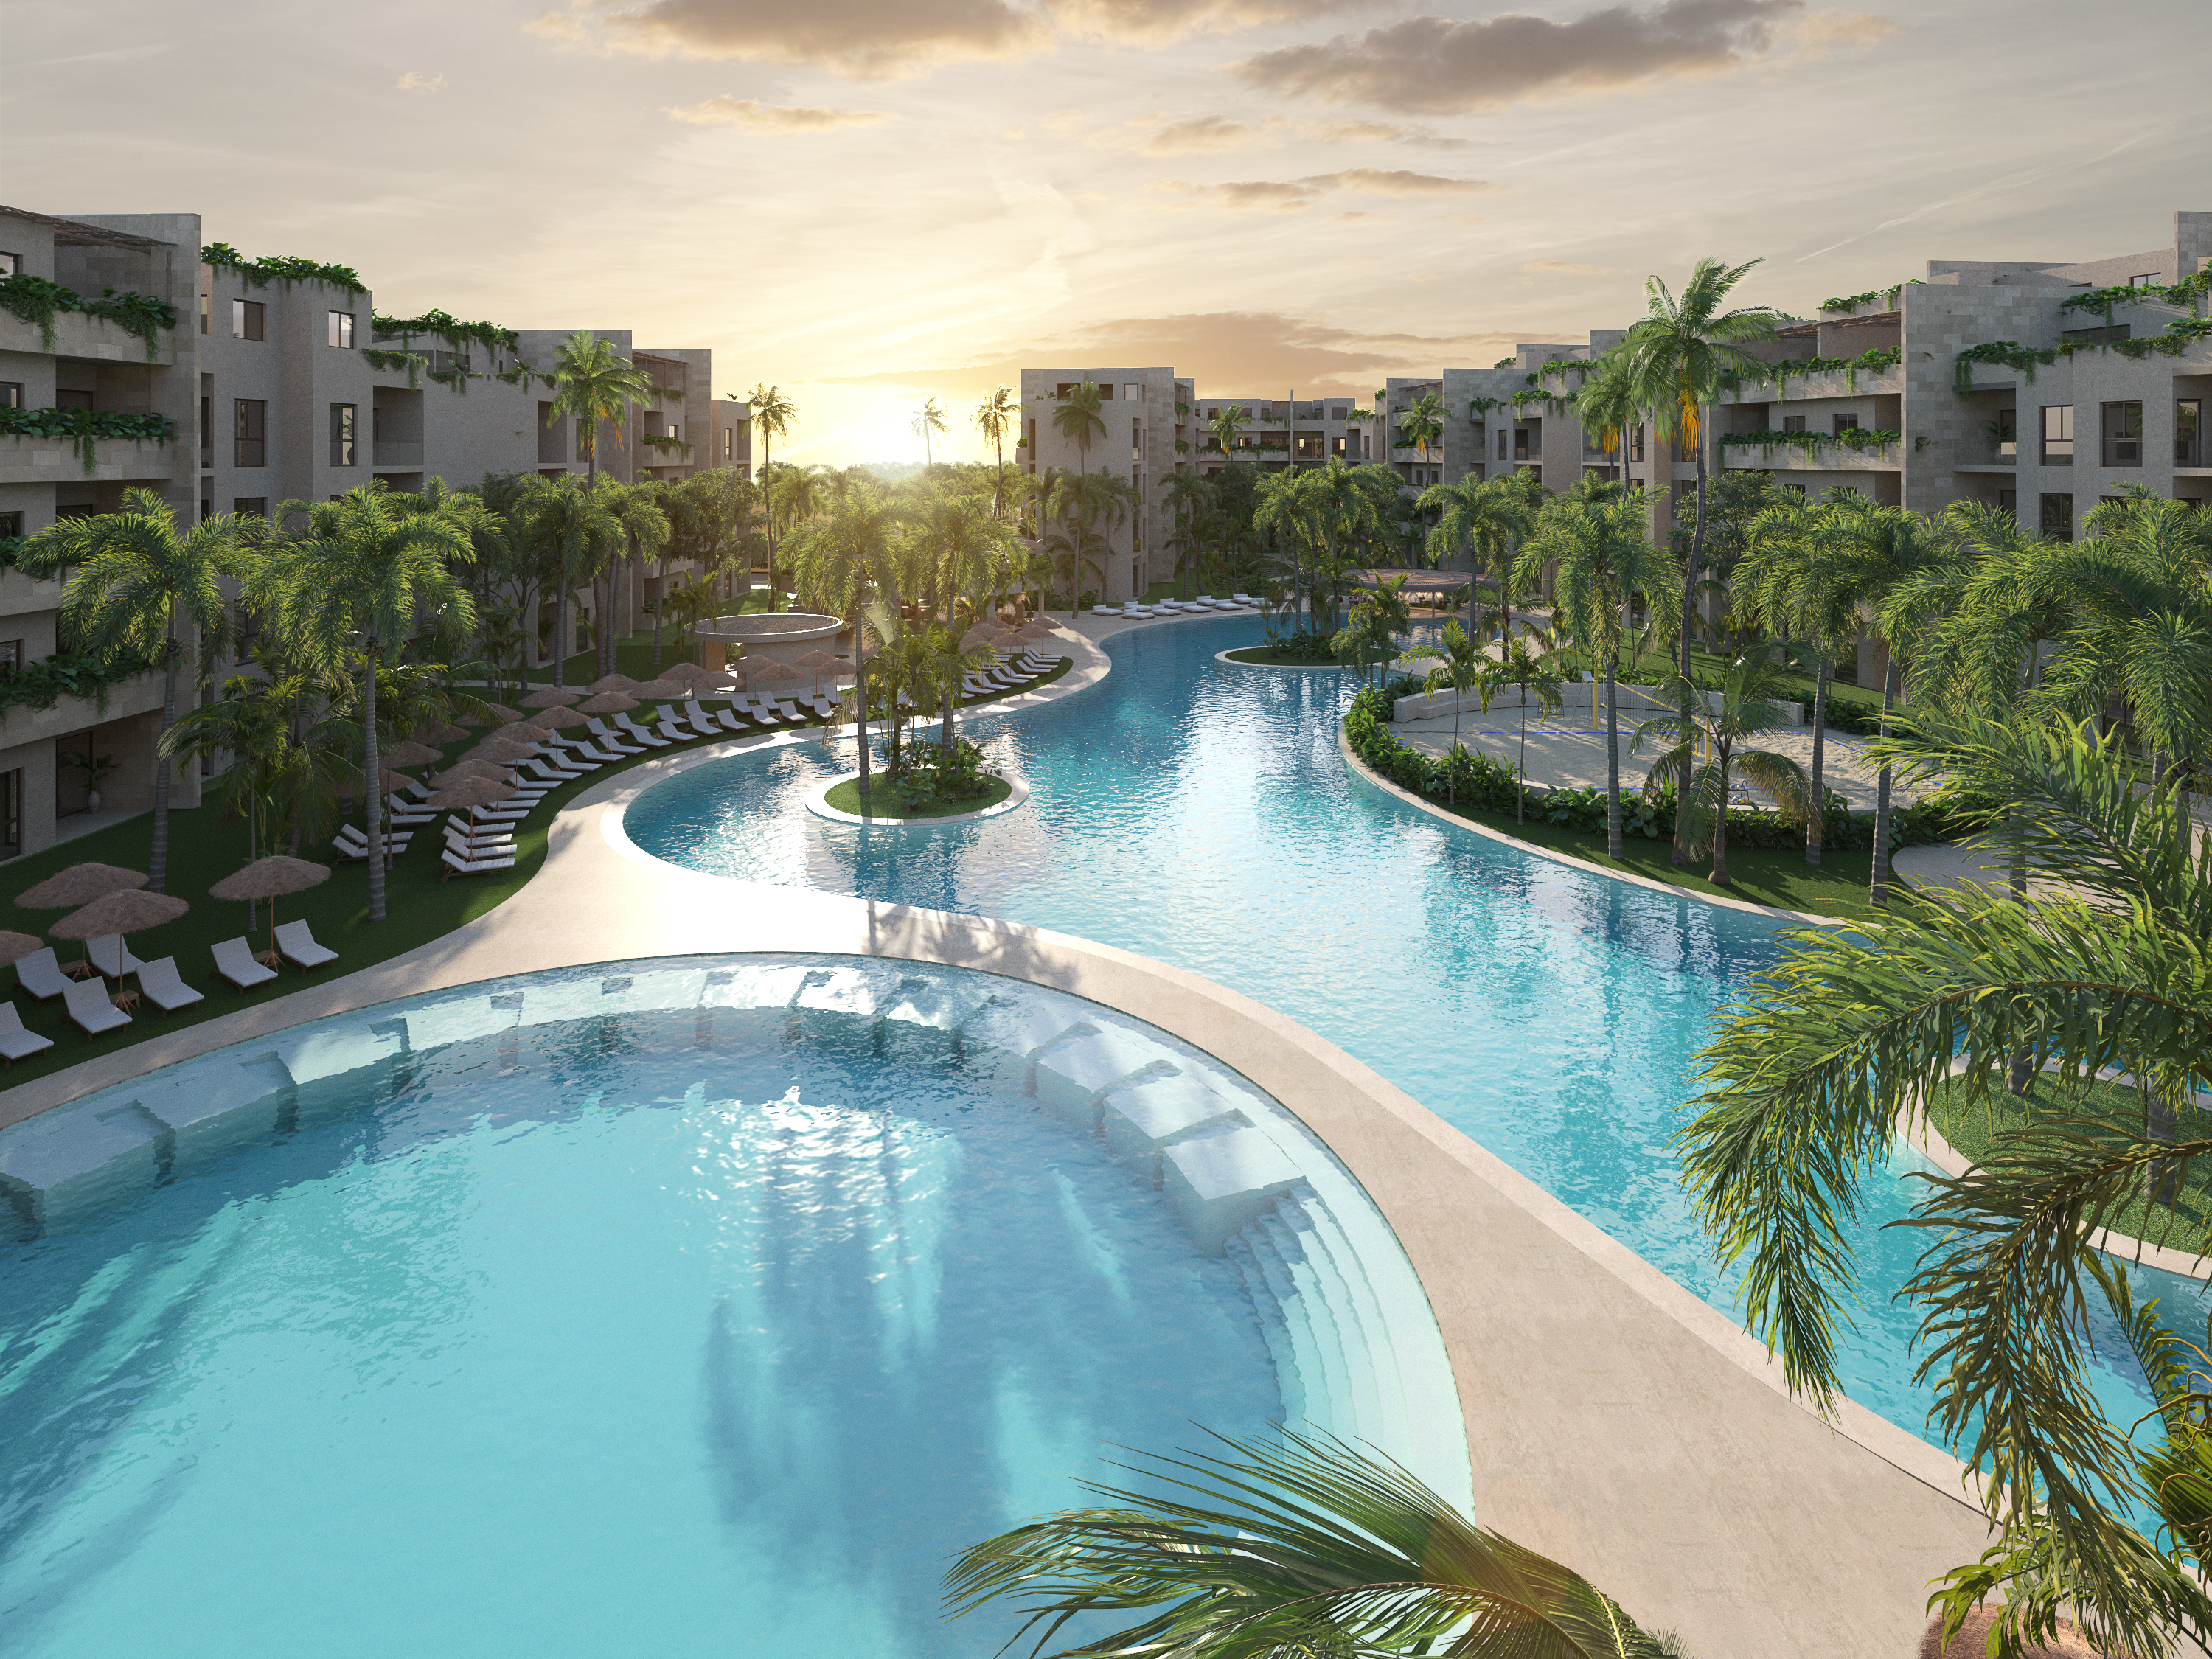 New Condos And Townhouses Just Steps From The Beach, Bávaro. Dominican Republic